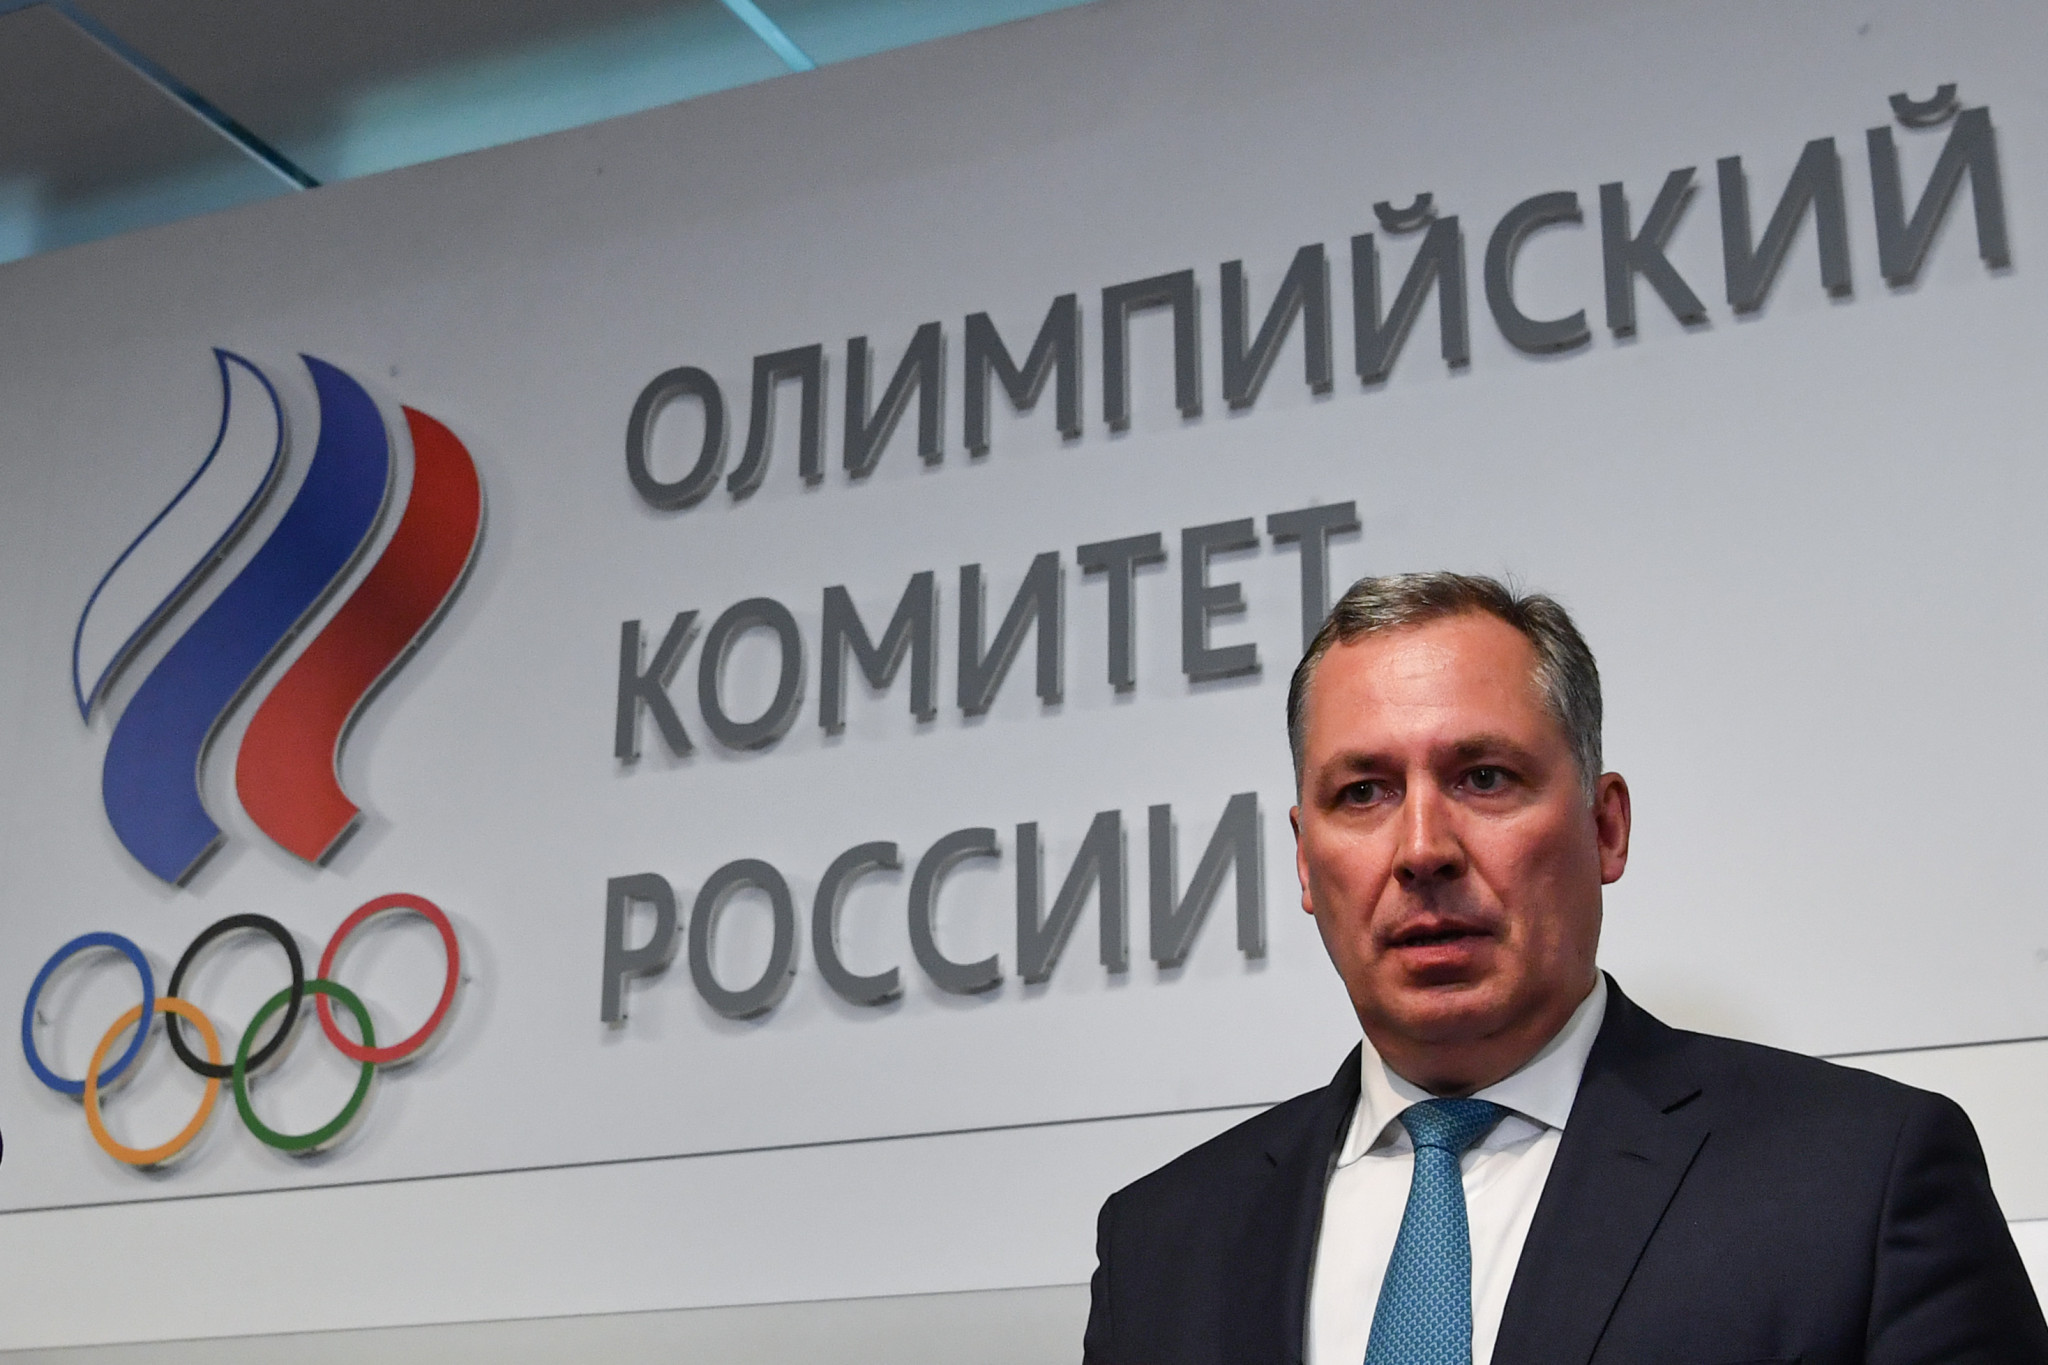 Russian Olympic Committee boss insists doping crisis is "reversed" as IOC support welcomed